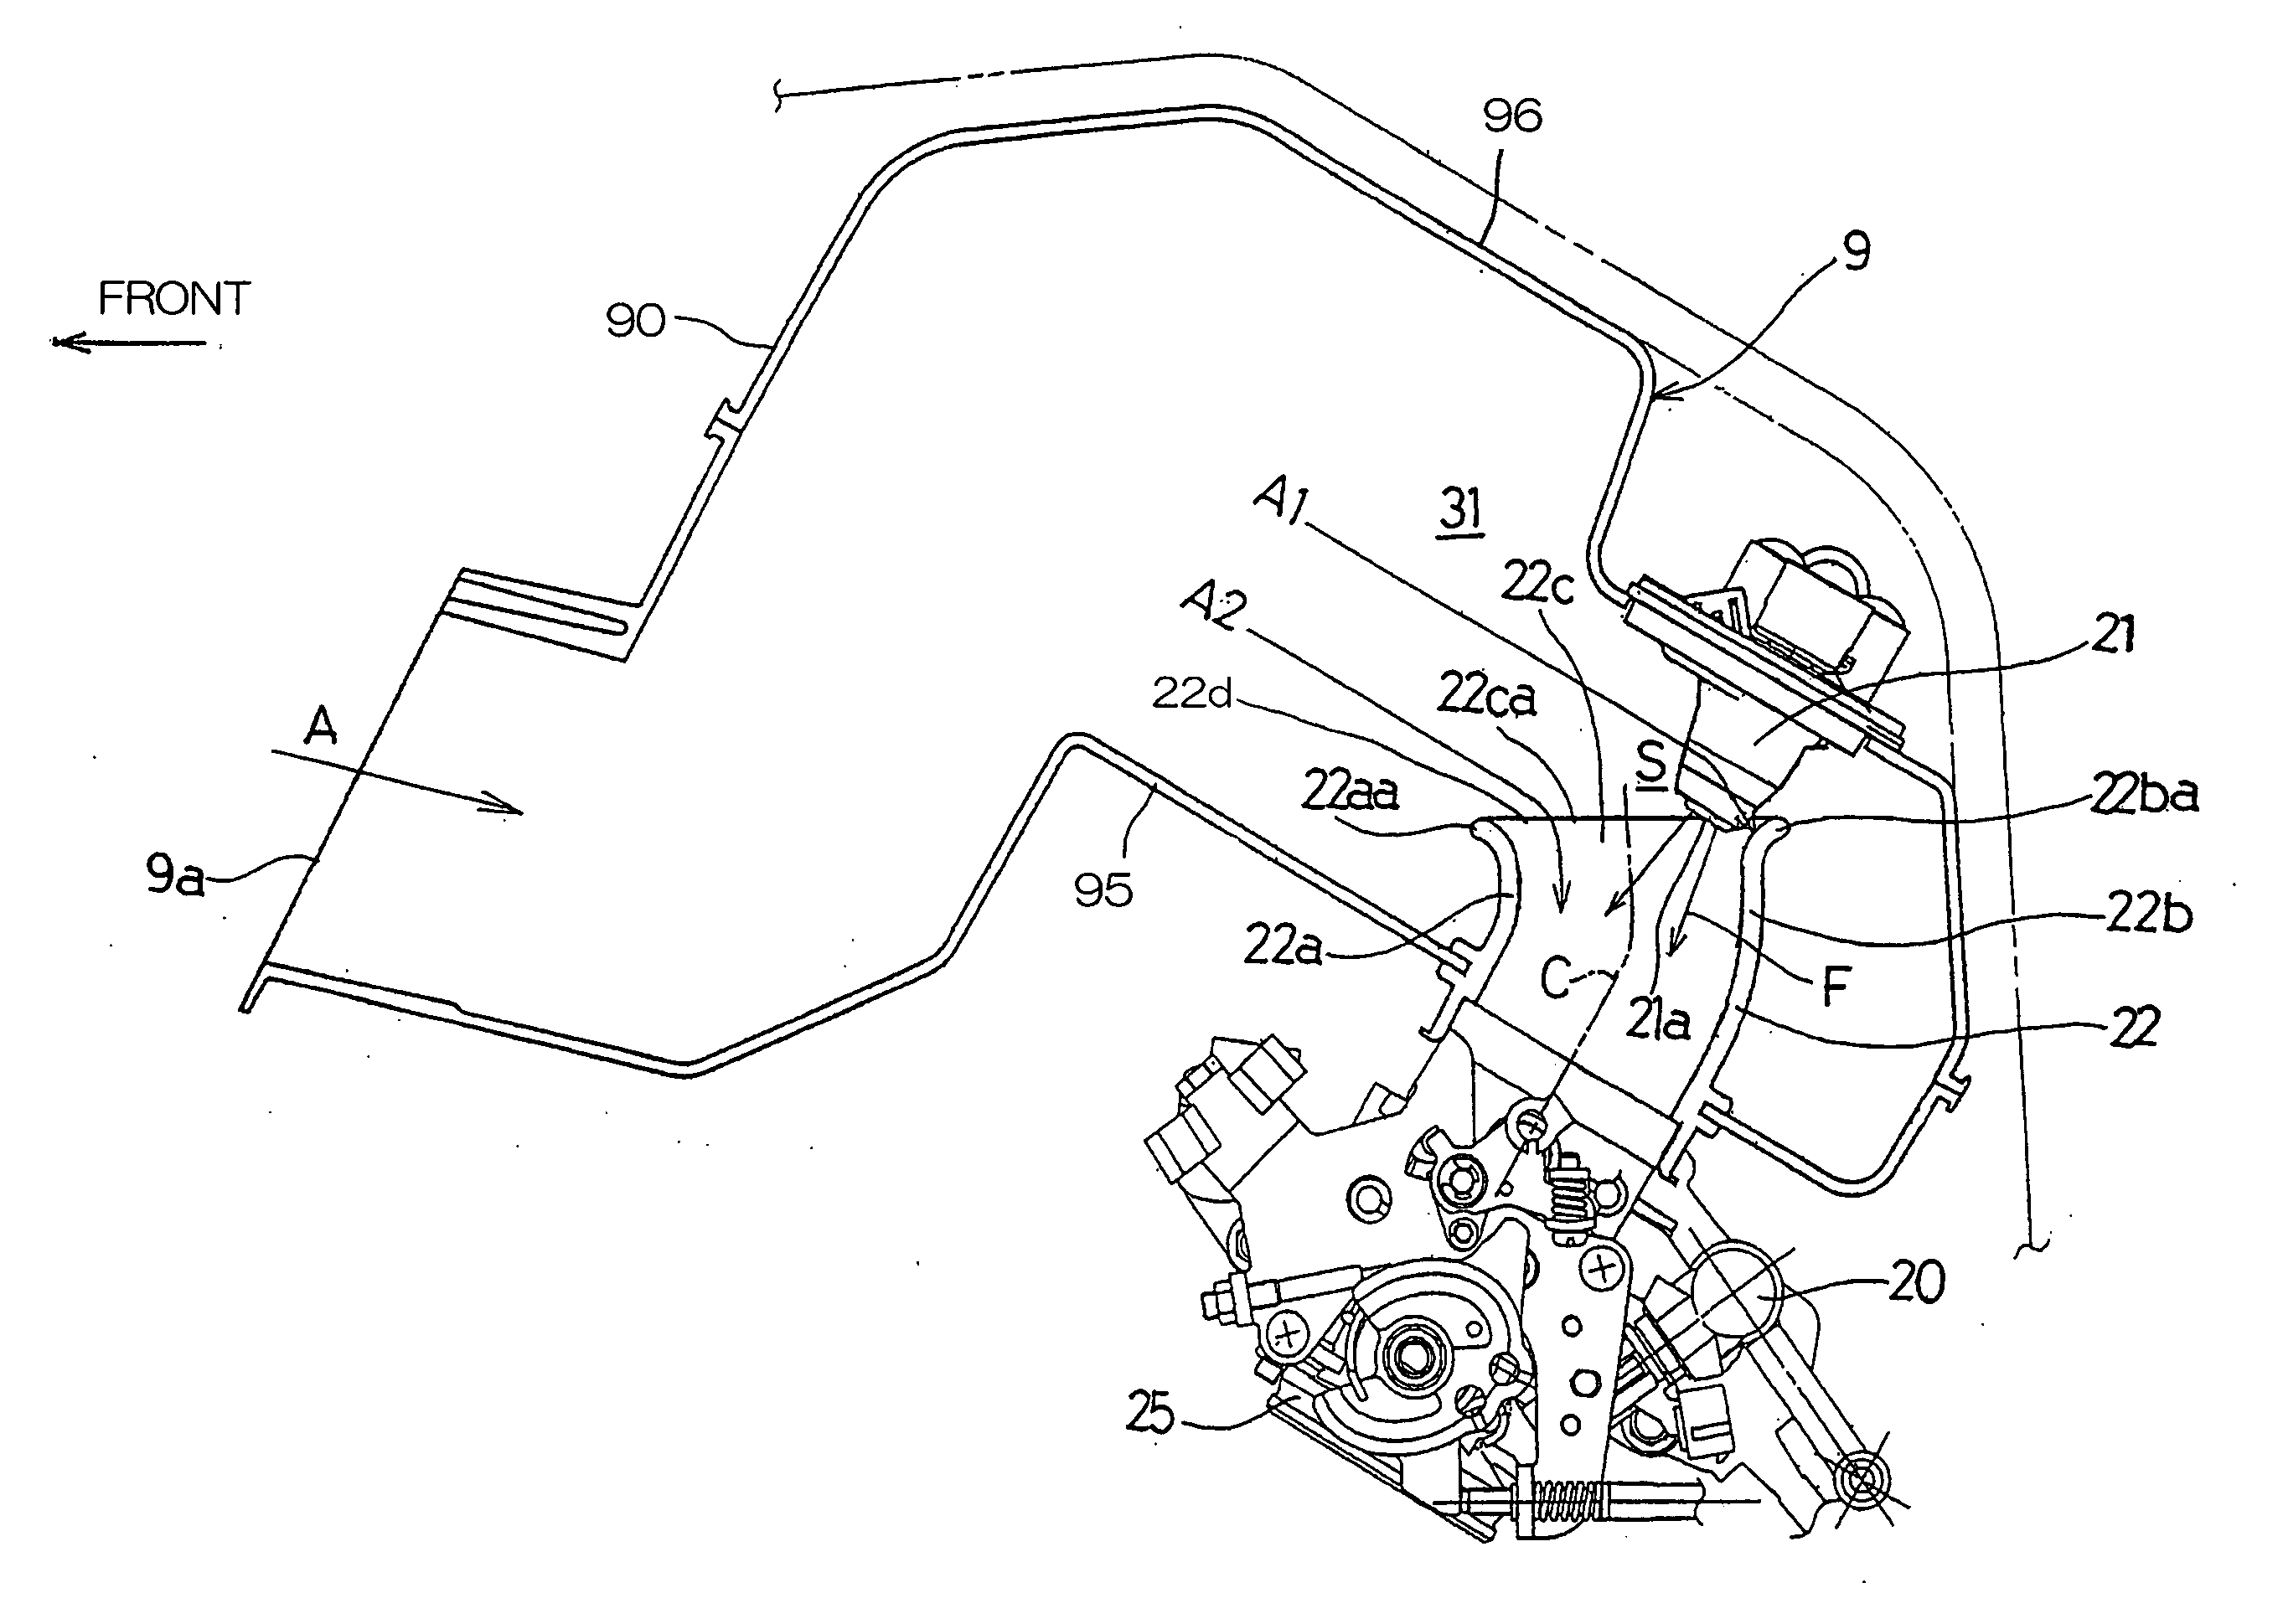 Intake system for combustion engine